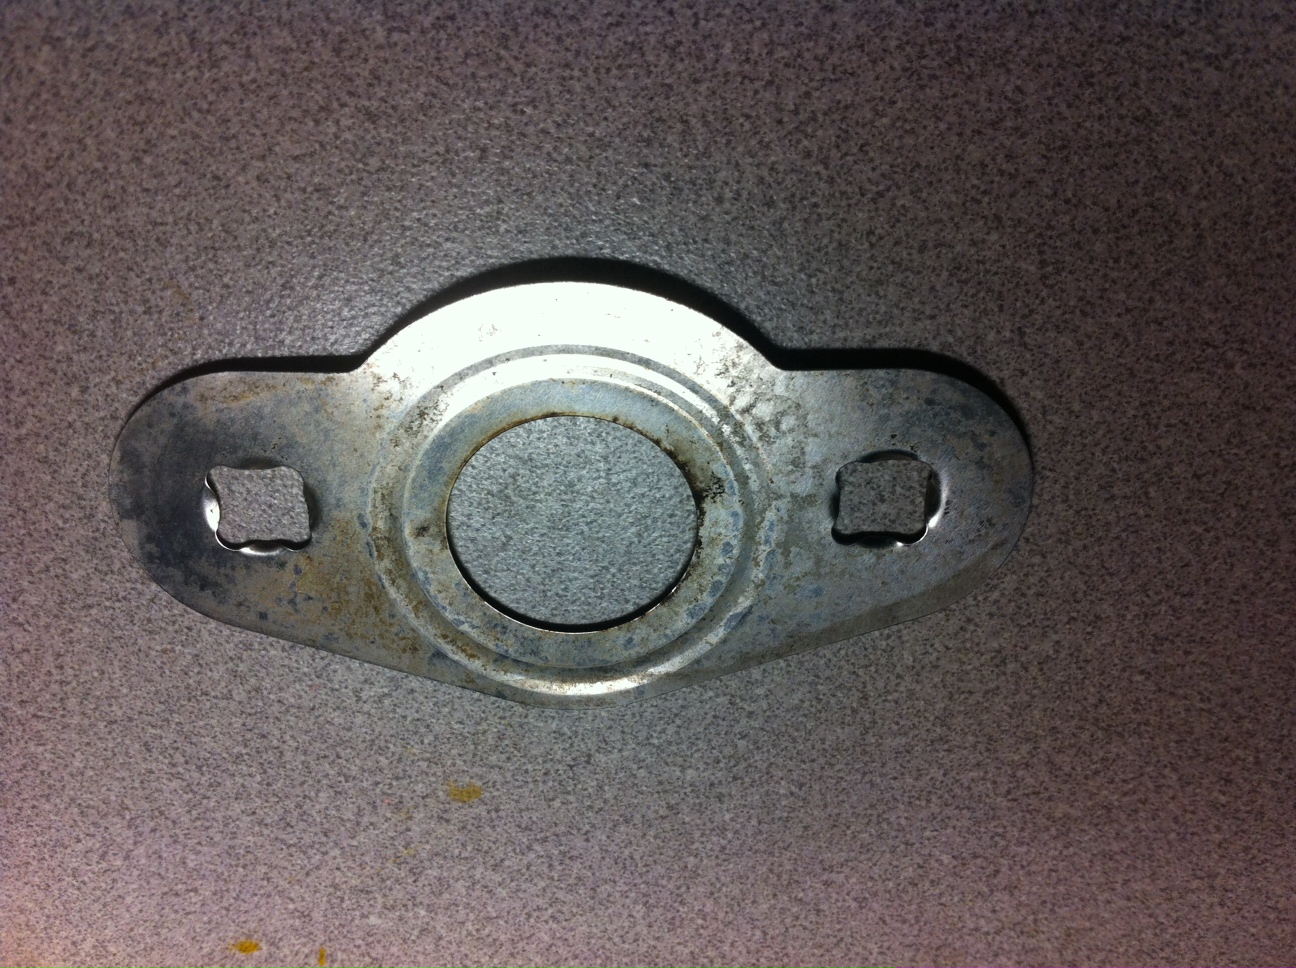 This is the found gasket in EGR valve.